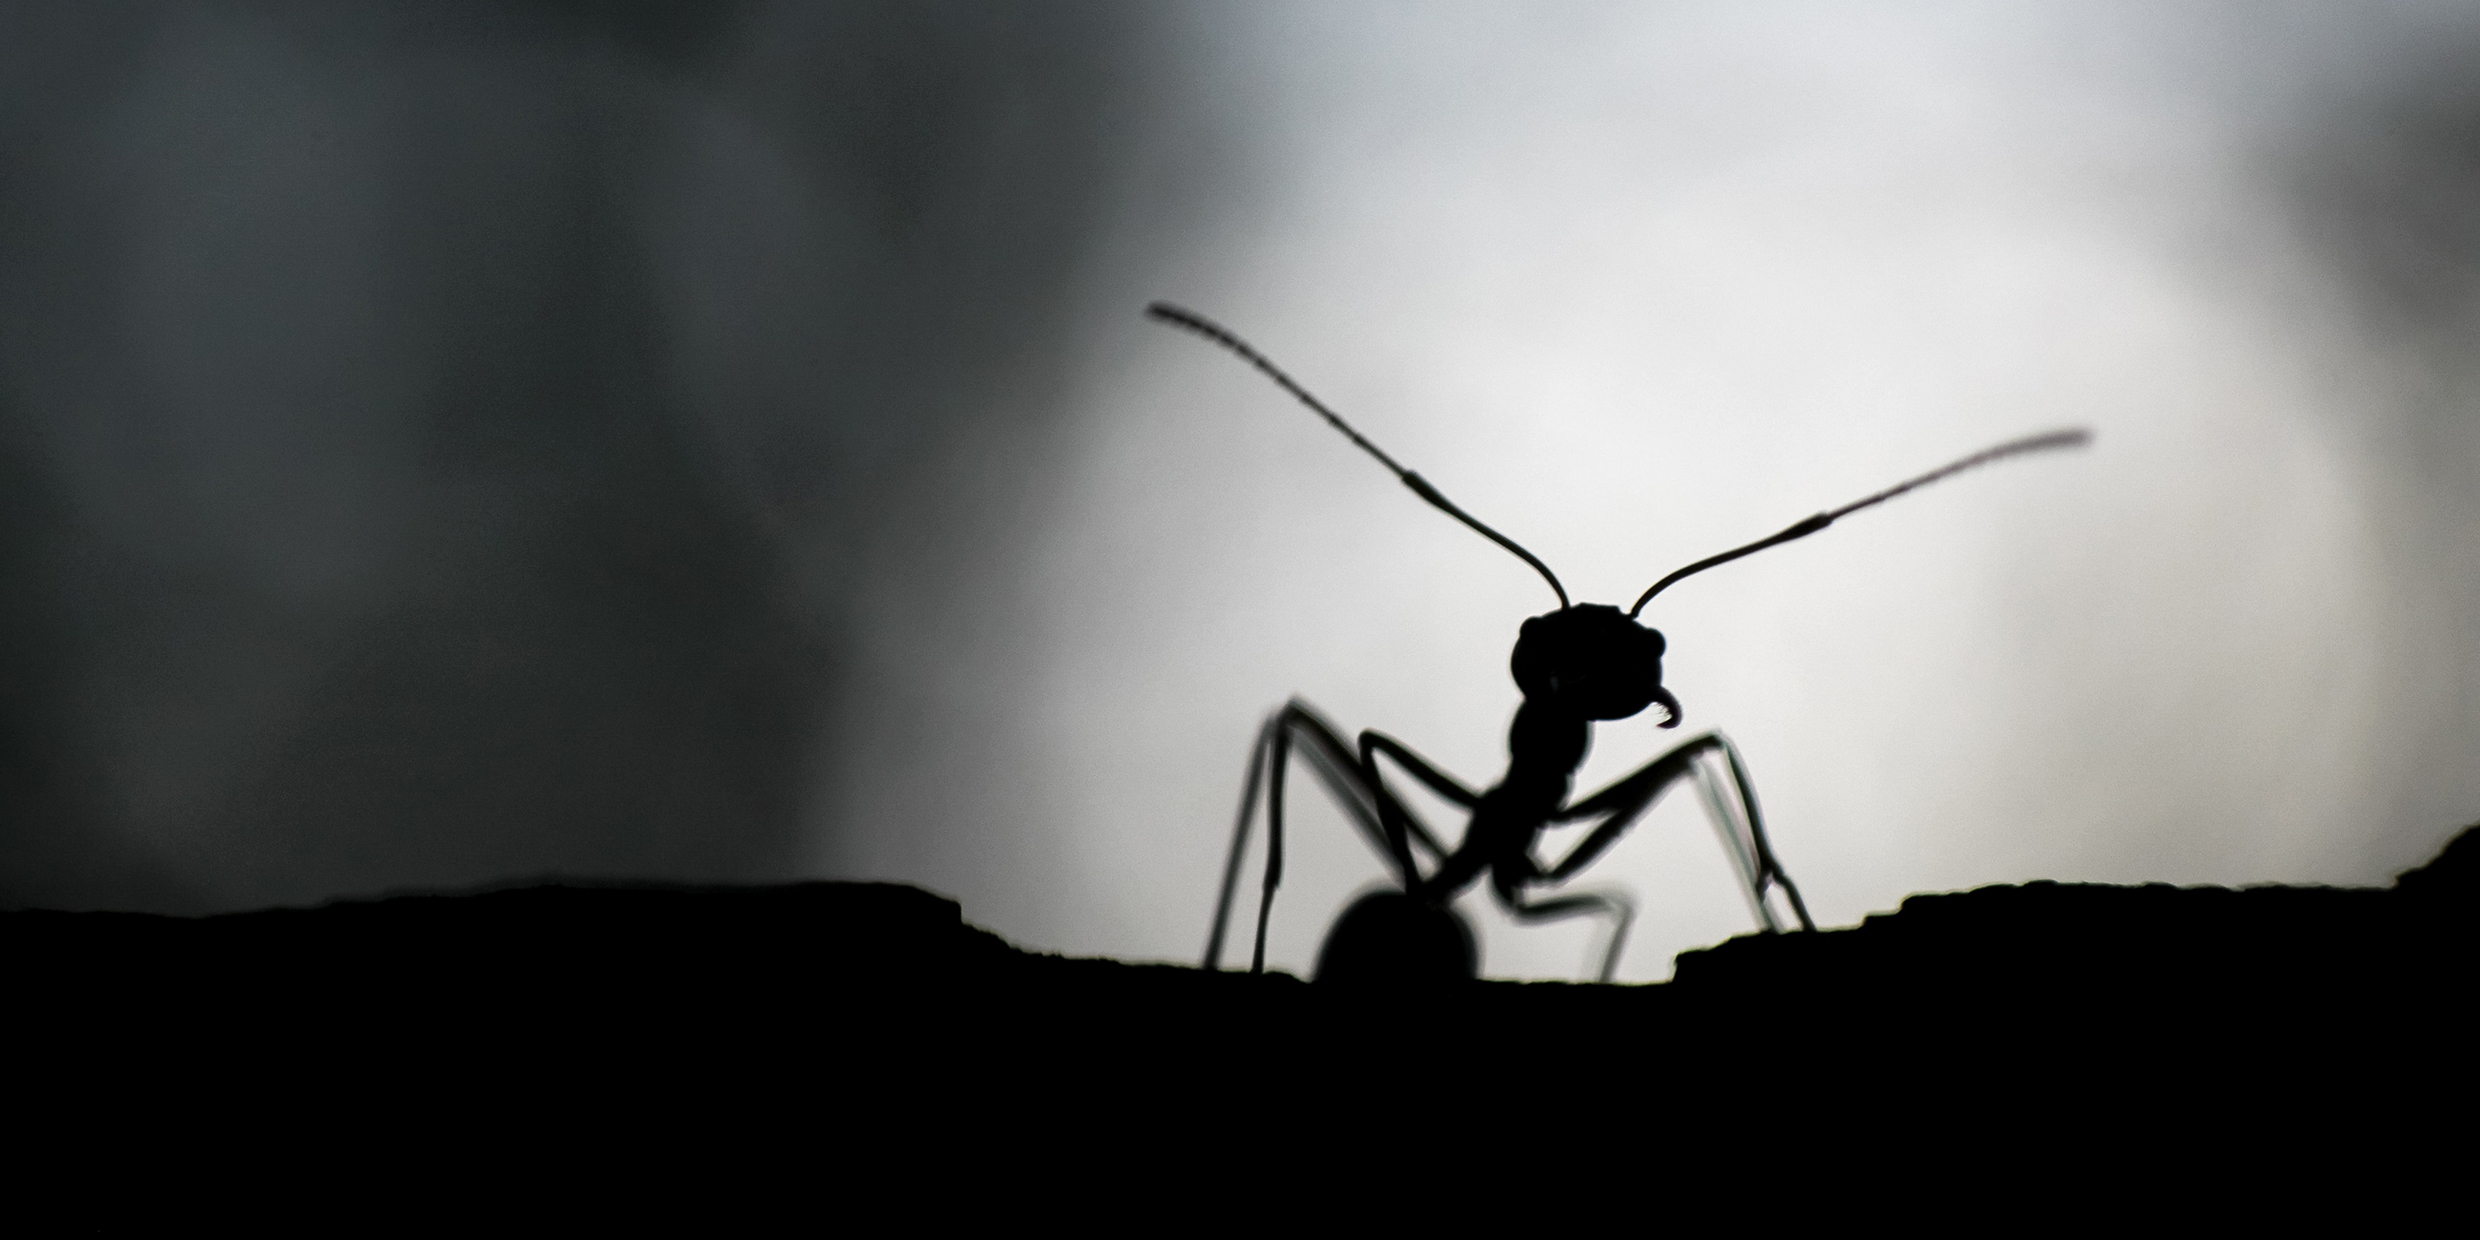 Image of a silhouette of an ant in darkness